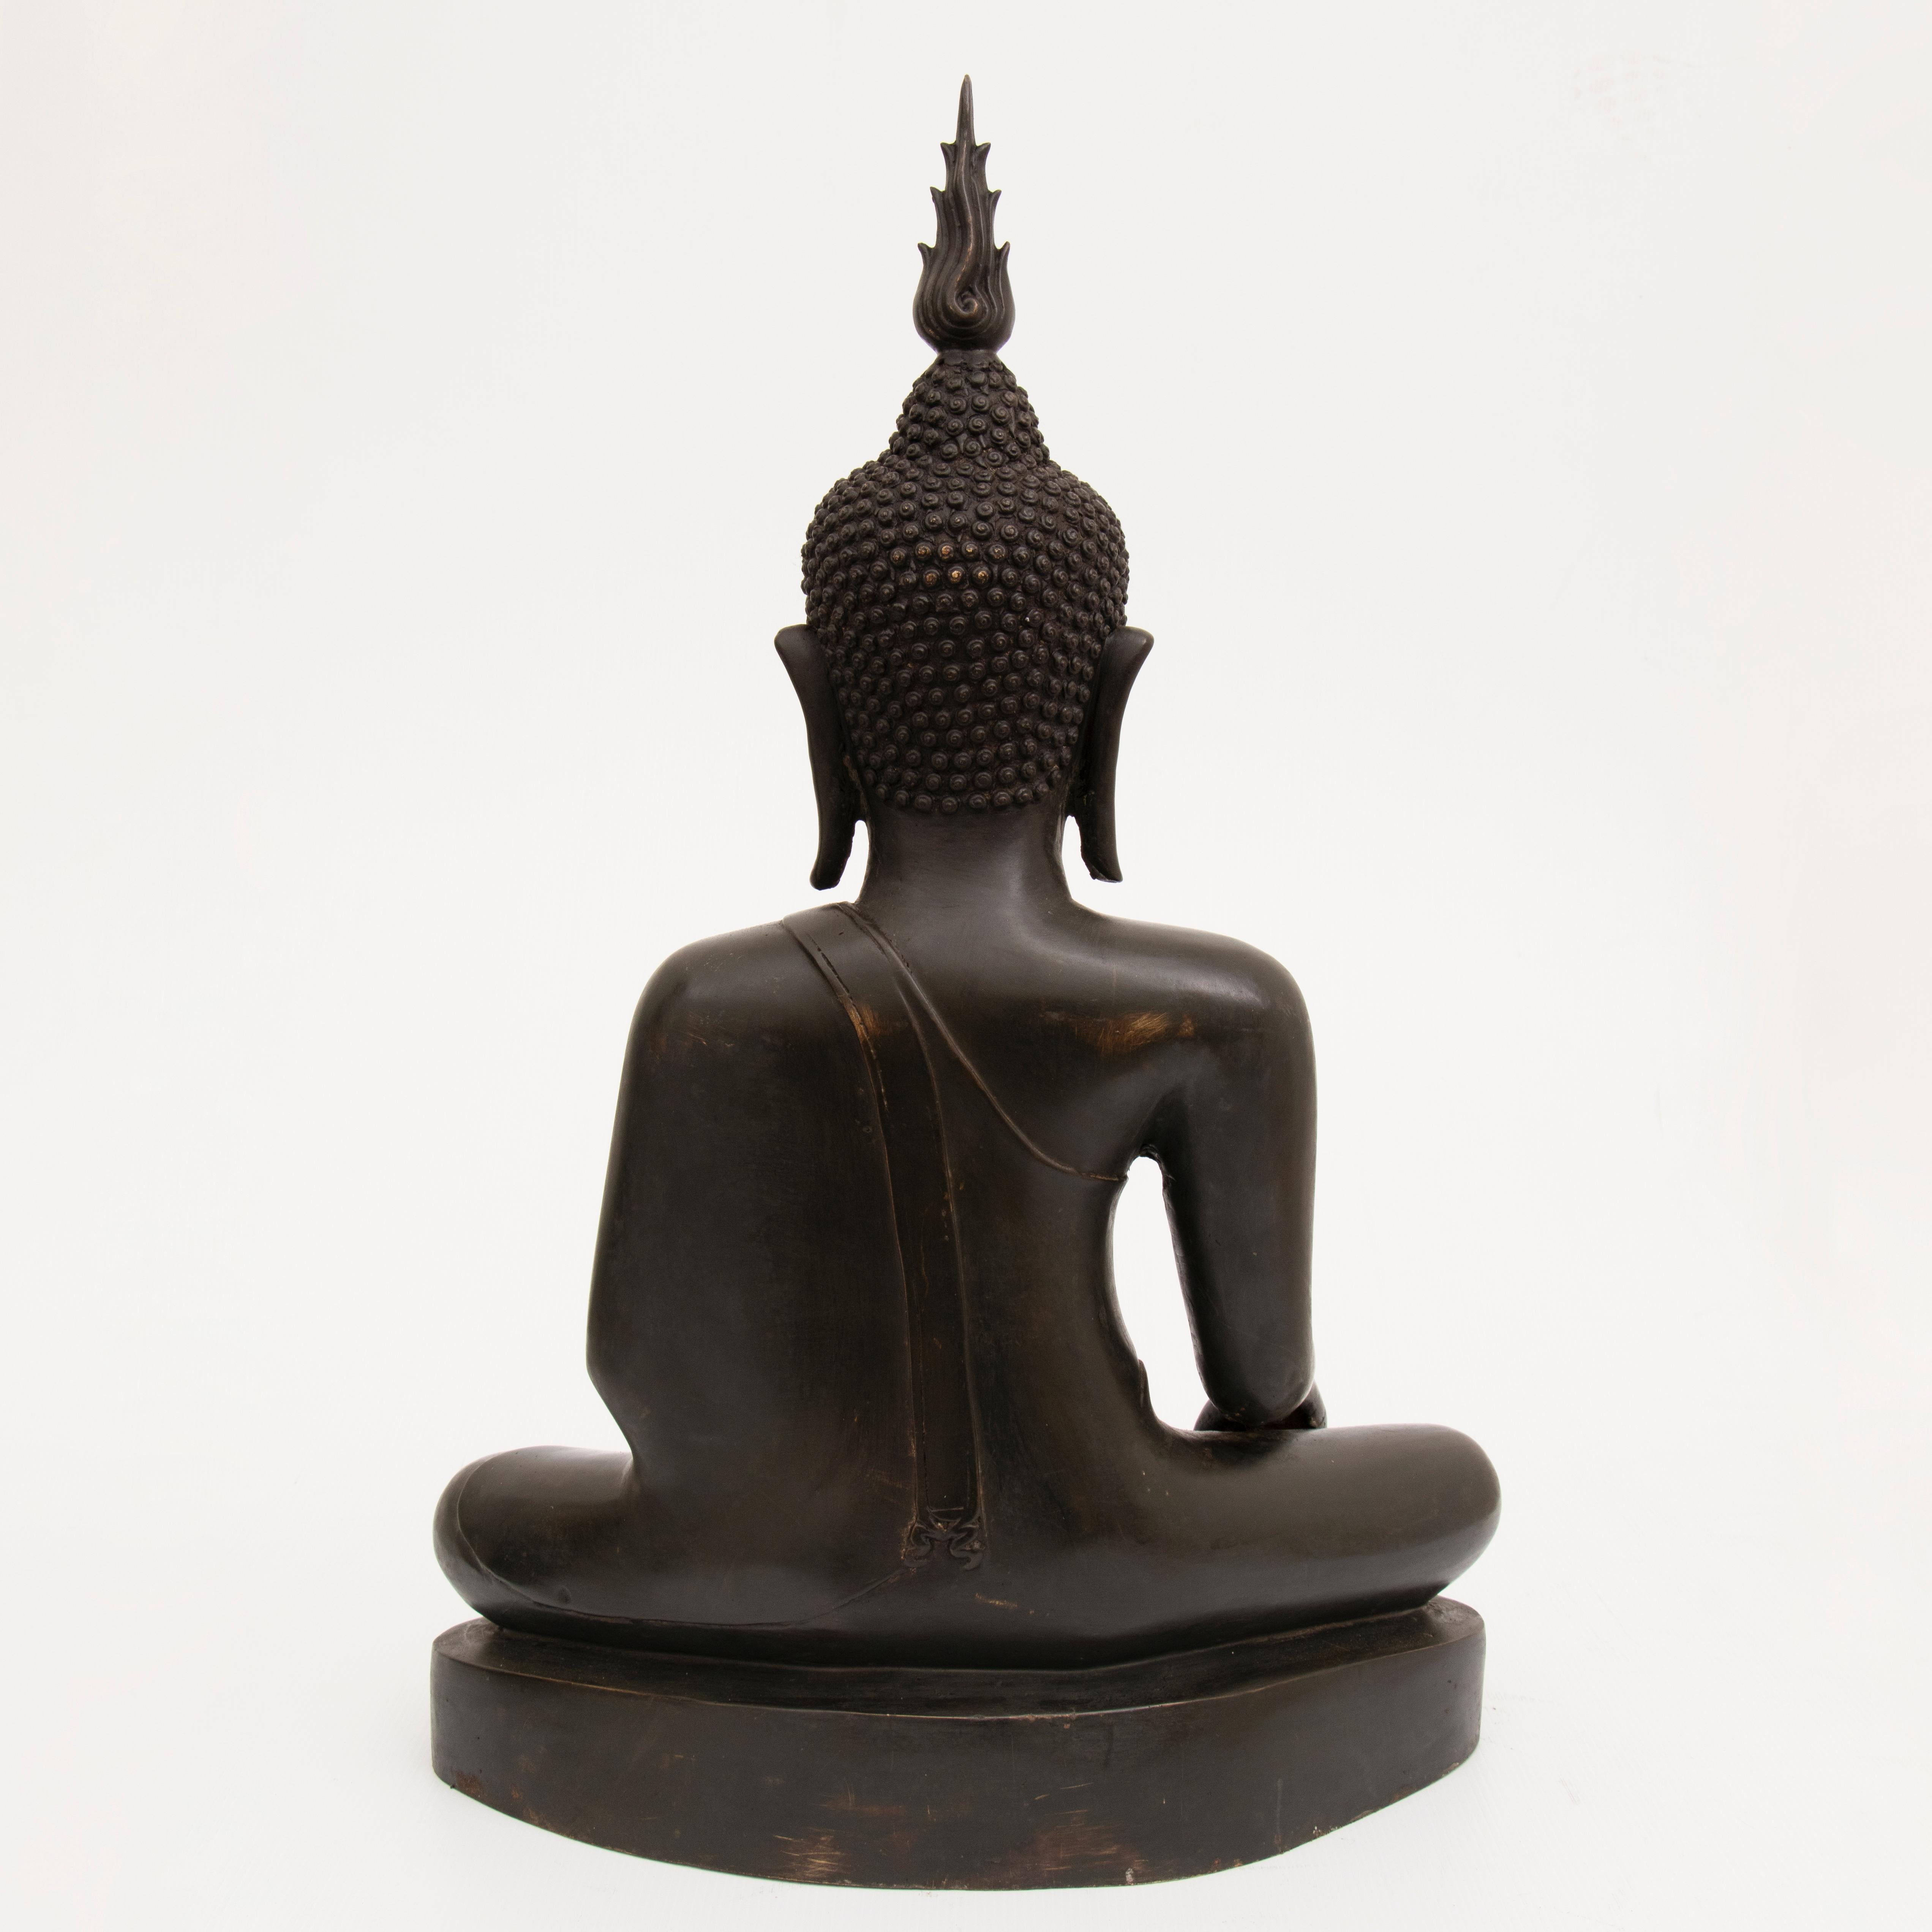 A large Tibetan bronze Buddha seated in the meditation position, circa 1960s or earlier, very good quality castings with a lovely untouched warm deep bronze finish.